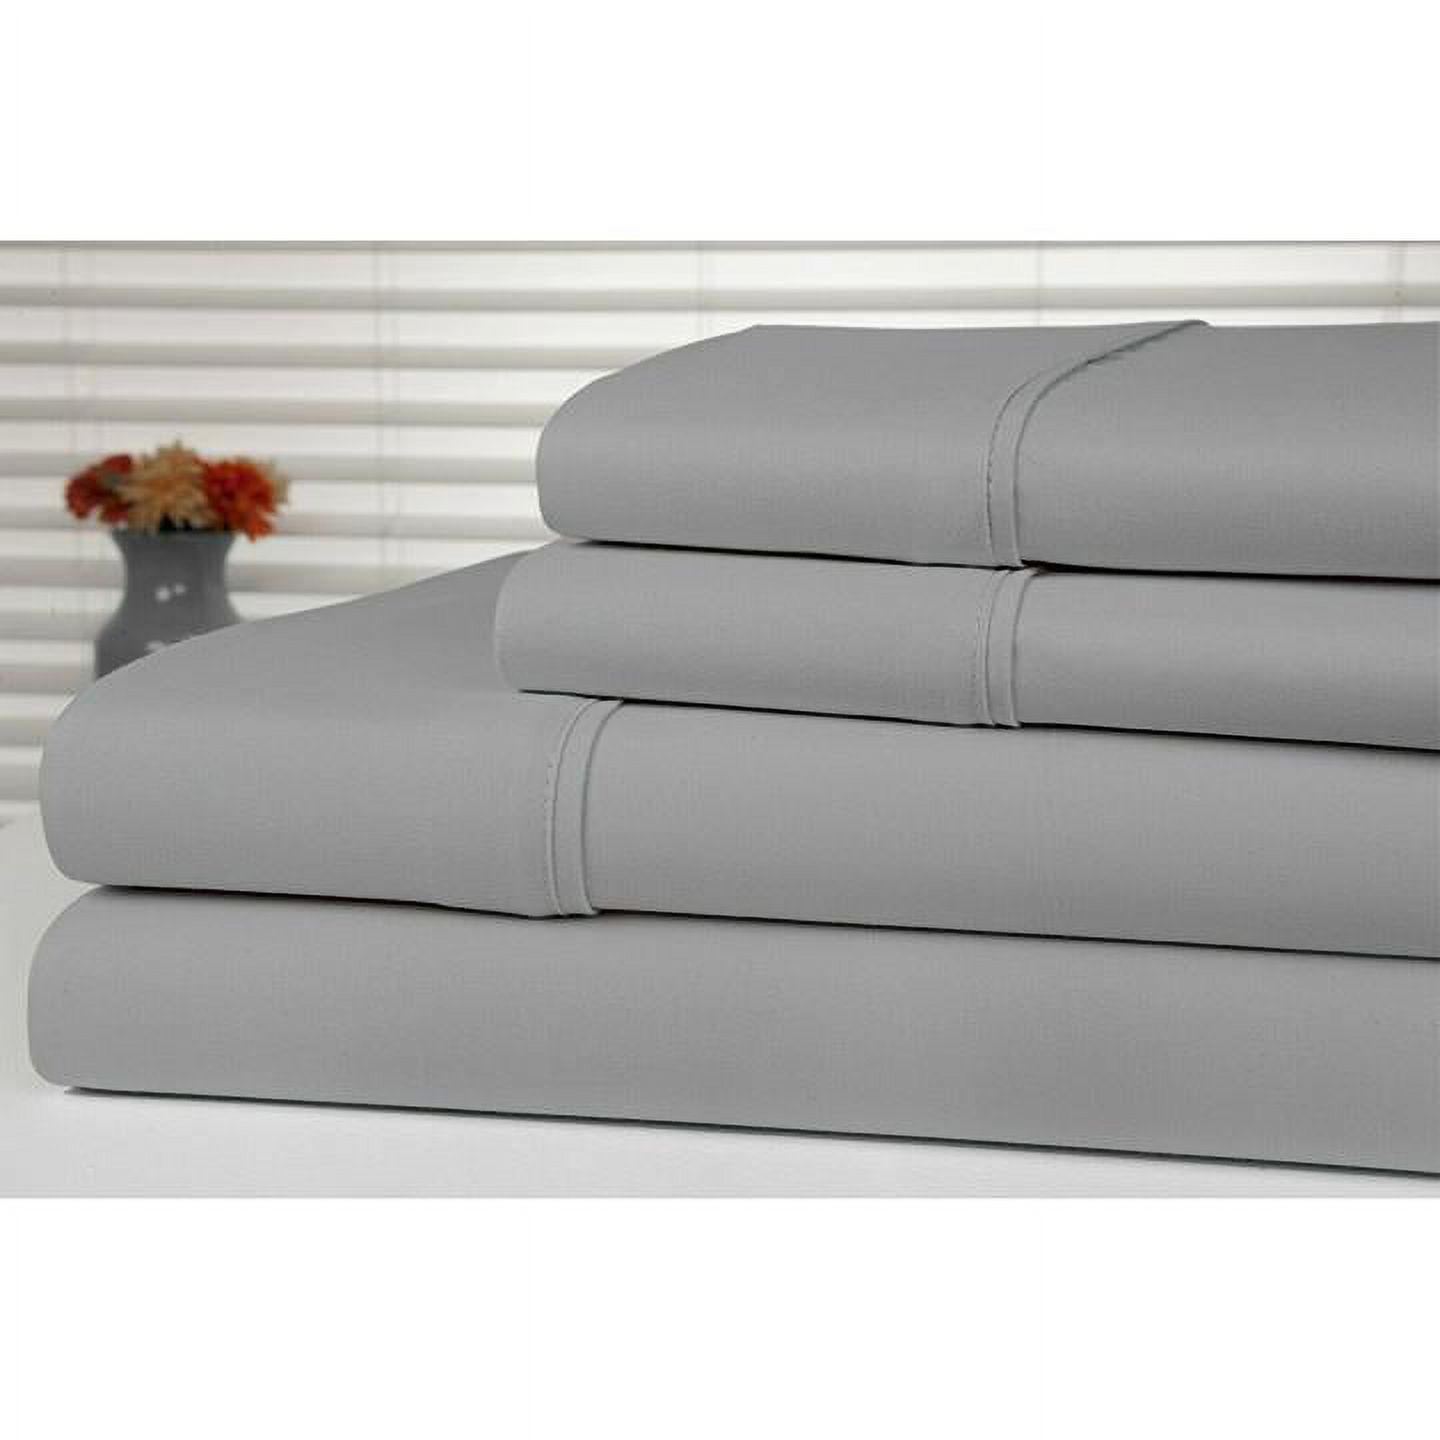 Bamboo Comfort  King Size Bamboo Luxury Solid Sheet Set, White - 4 Piece - image 11 of 21